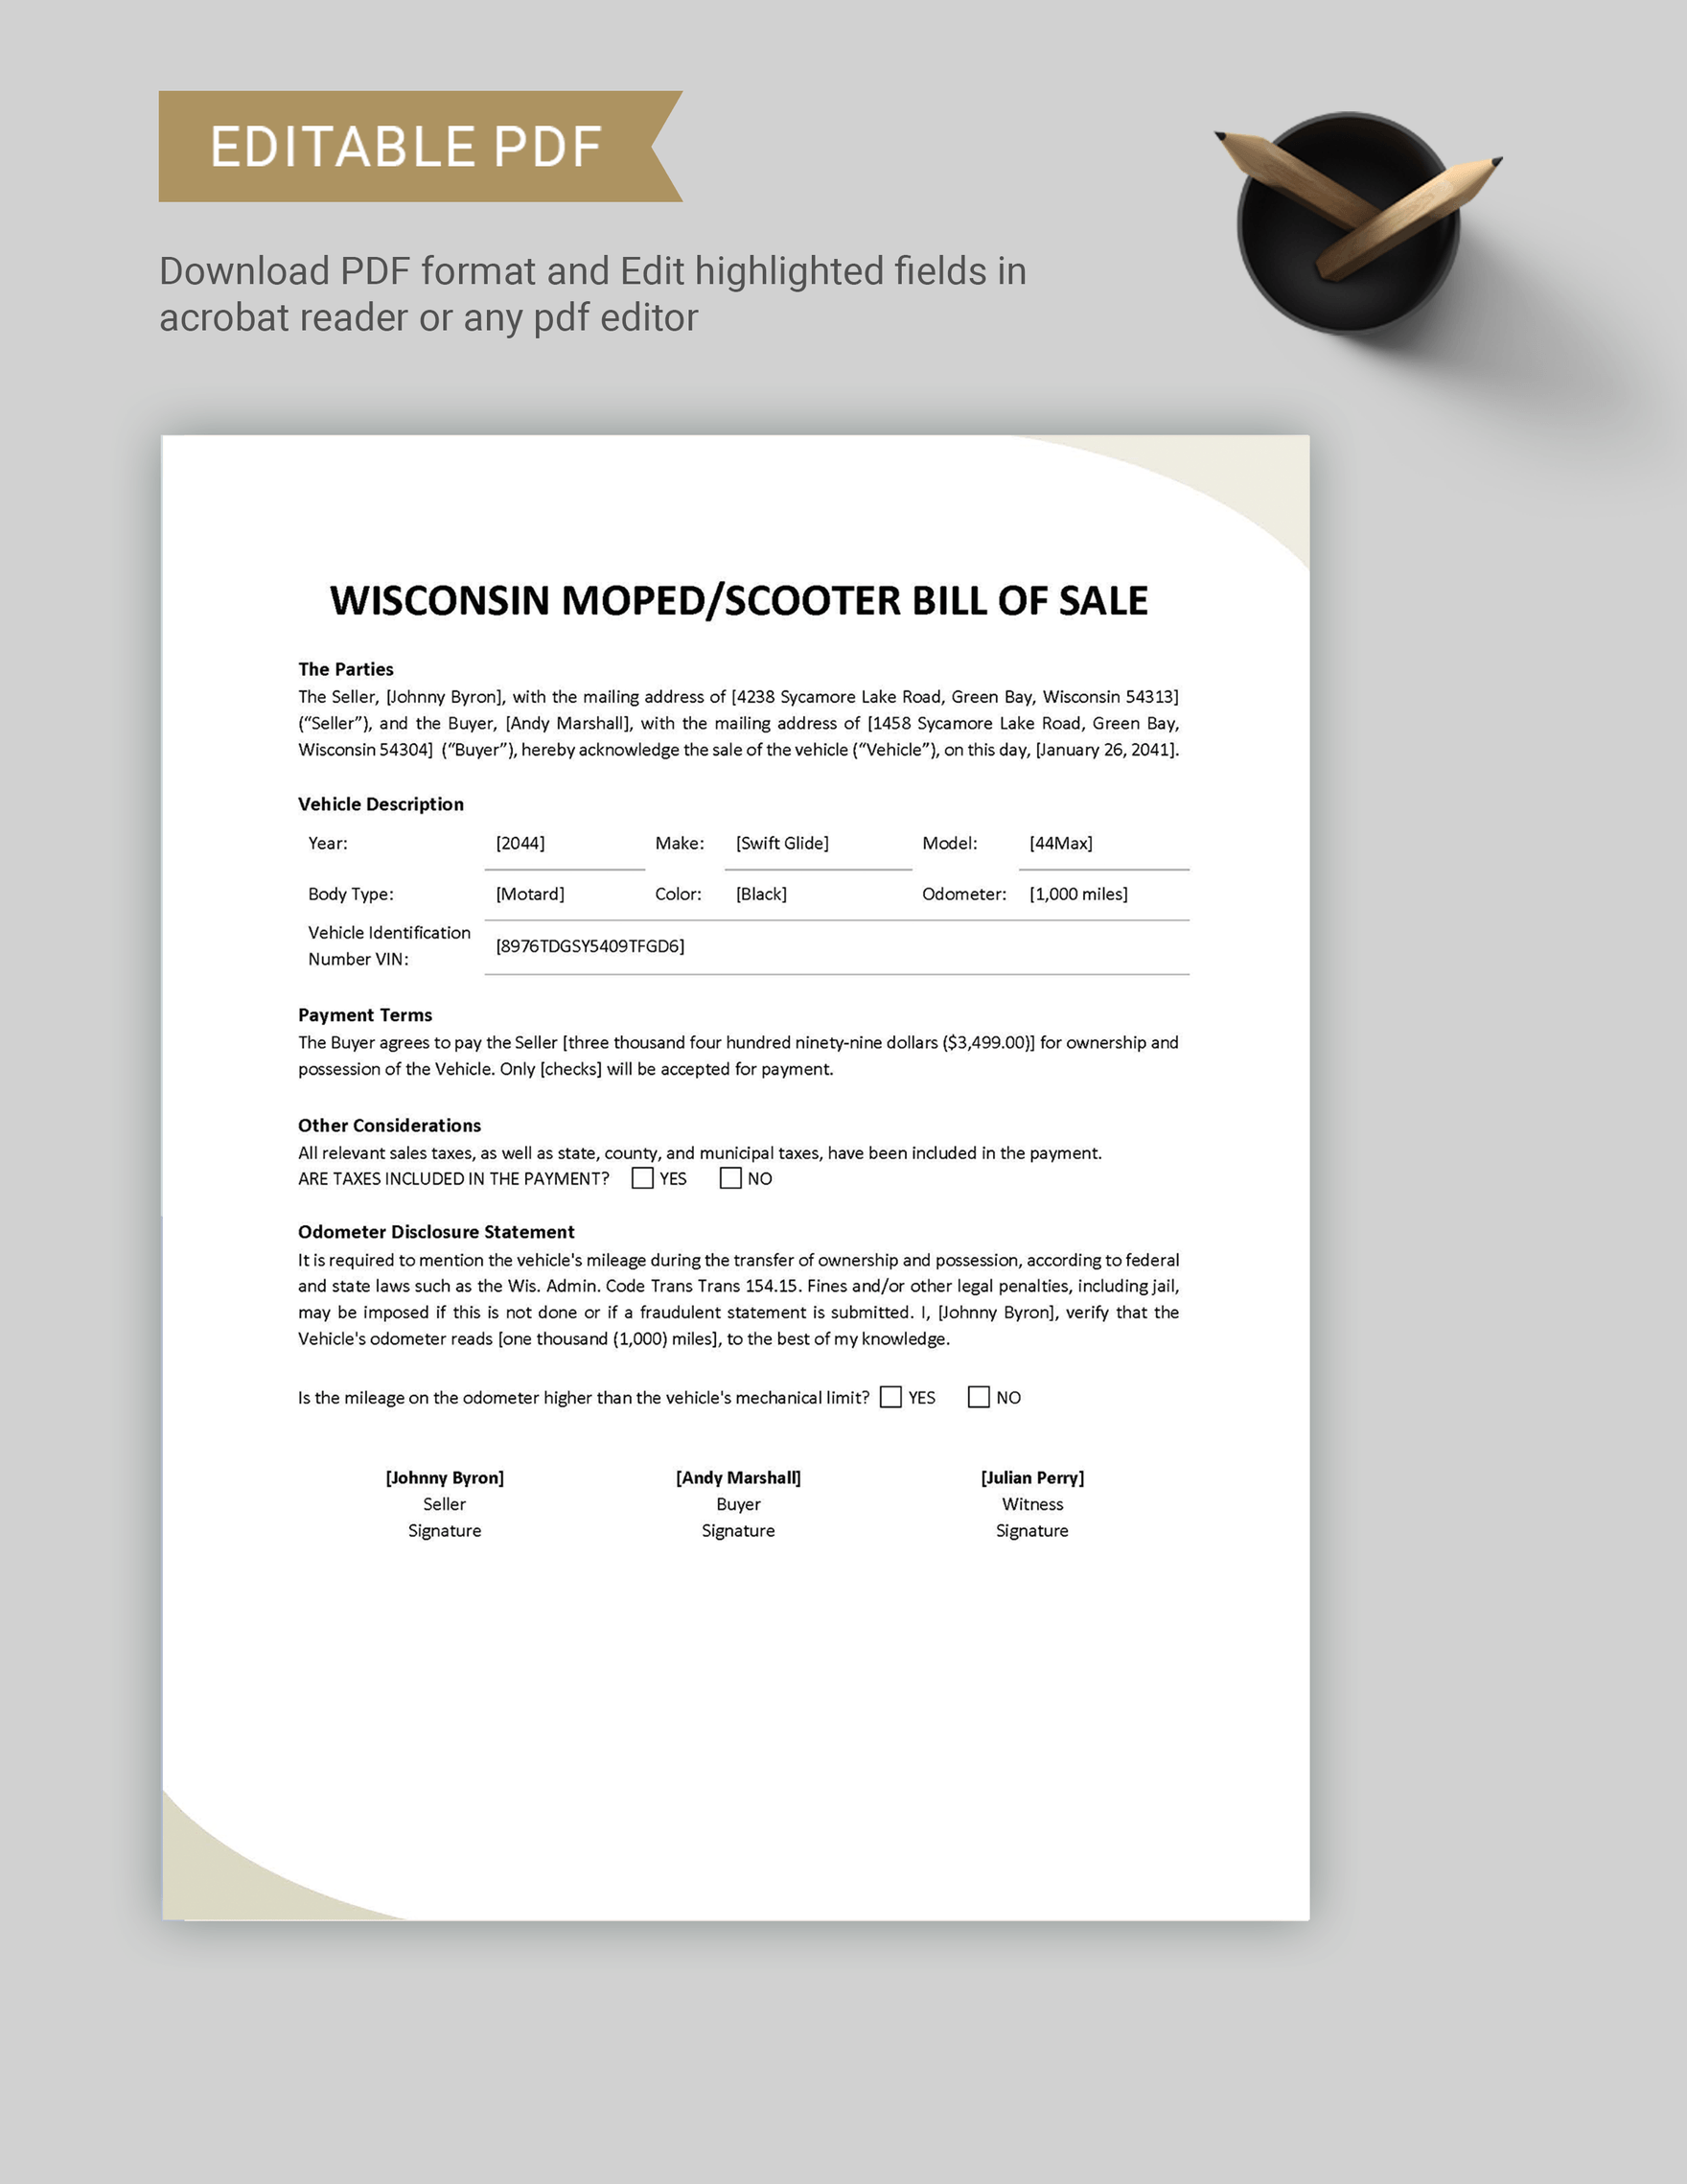 Wisconsin Moped / Scooter Bill of Sale Template